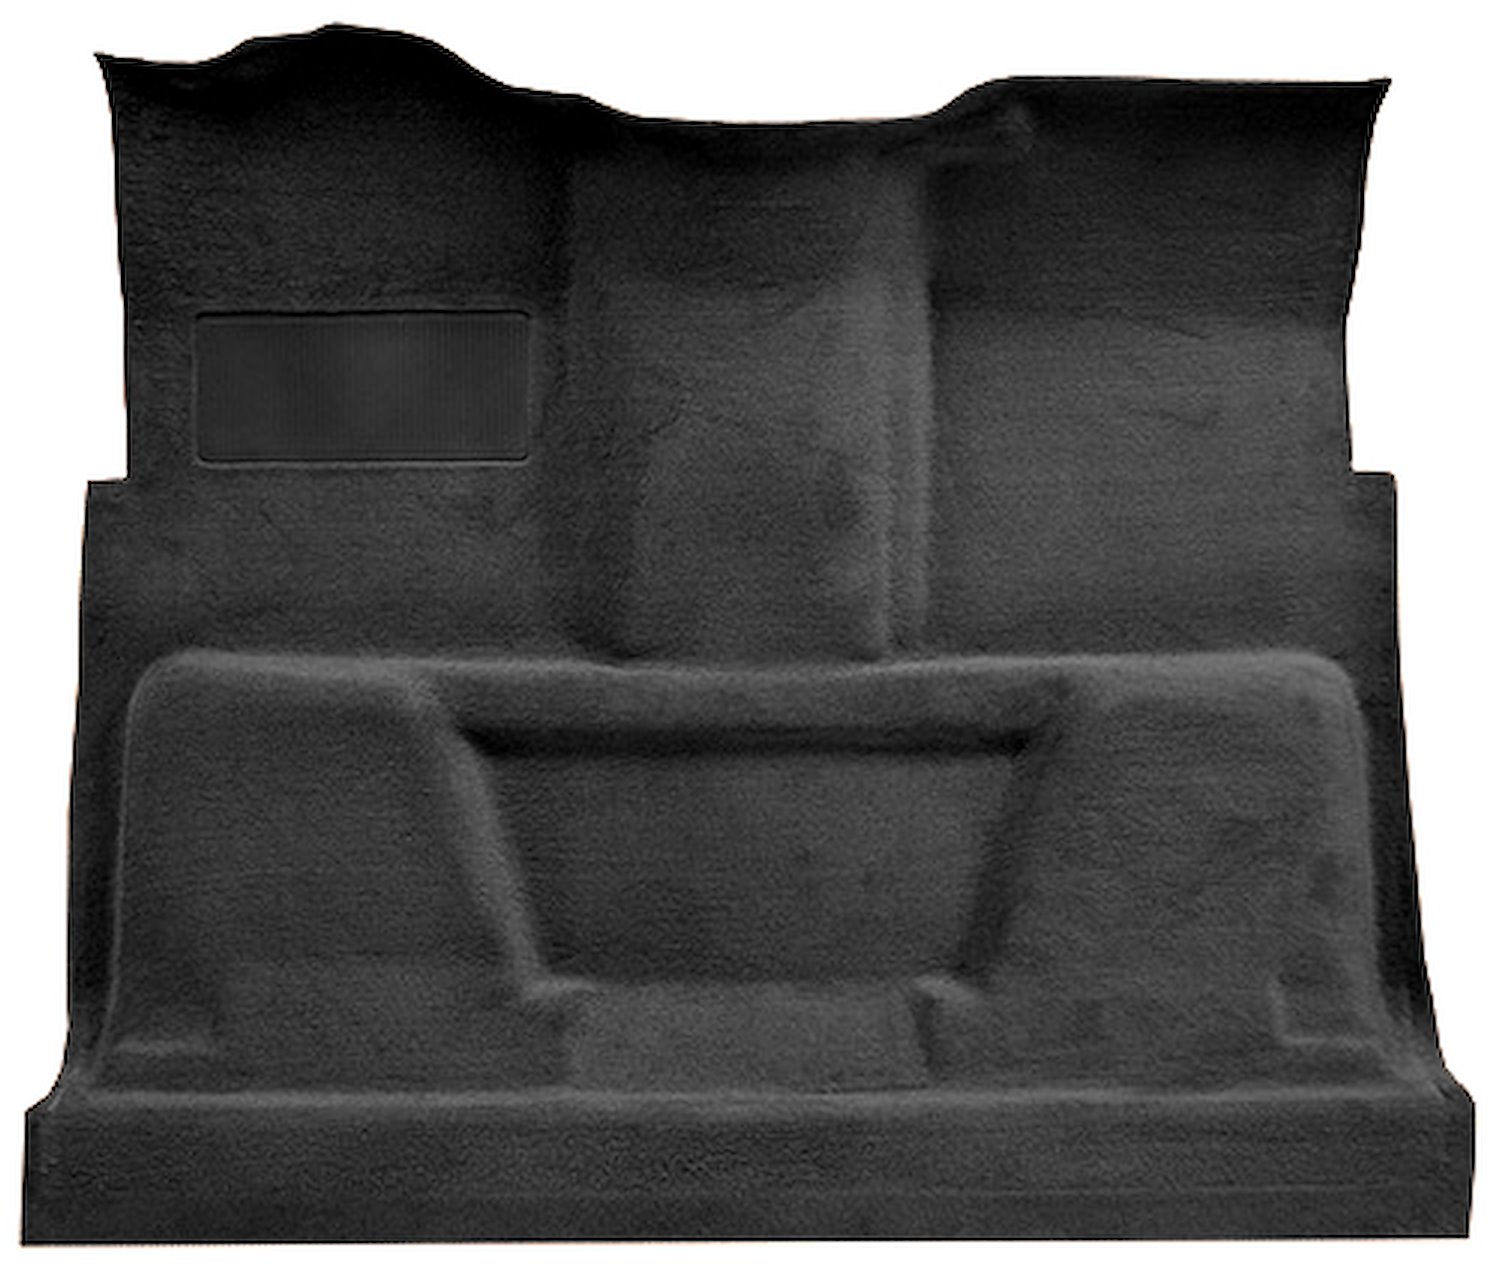 Molded Cut Pile Carpet for 1975-1980 GM C Series Regular Cab Trucks w/TH350 or 3-Speed [OE-Style Jute Backing, Black]